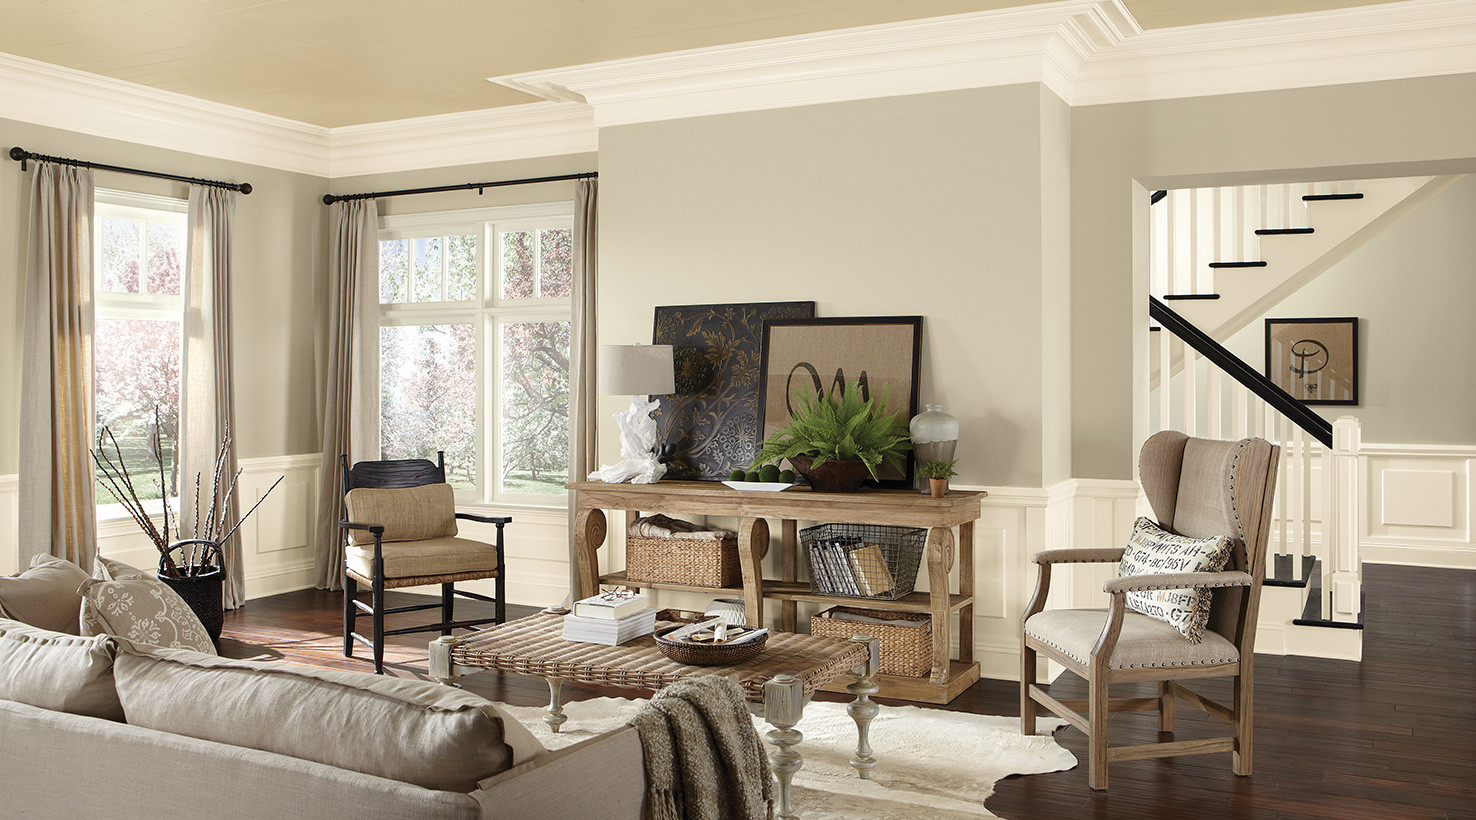 Painting A Living Room
 Living Room Paint Color Ideas